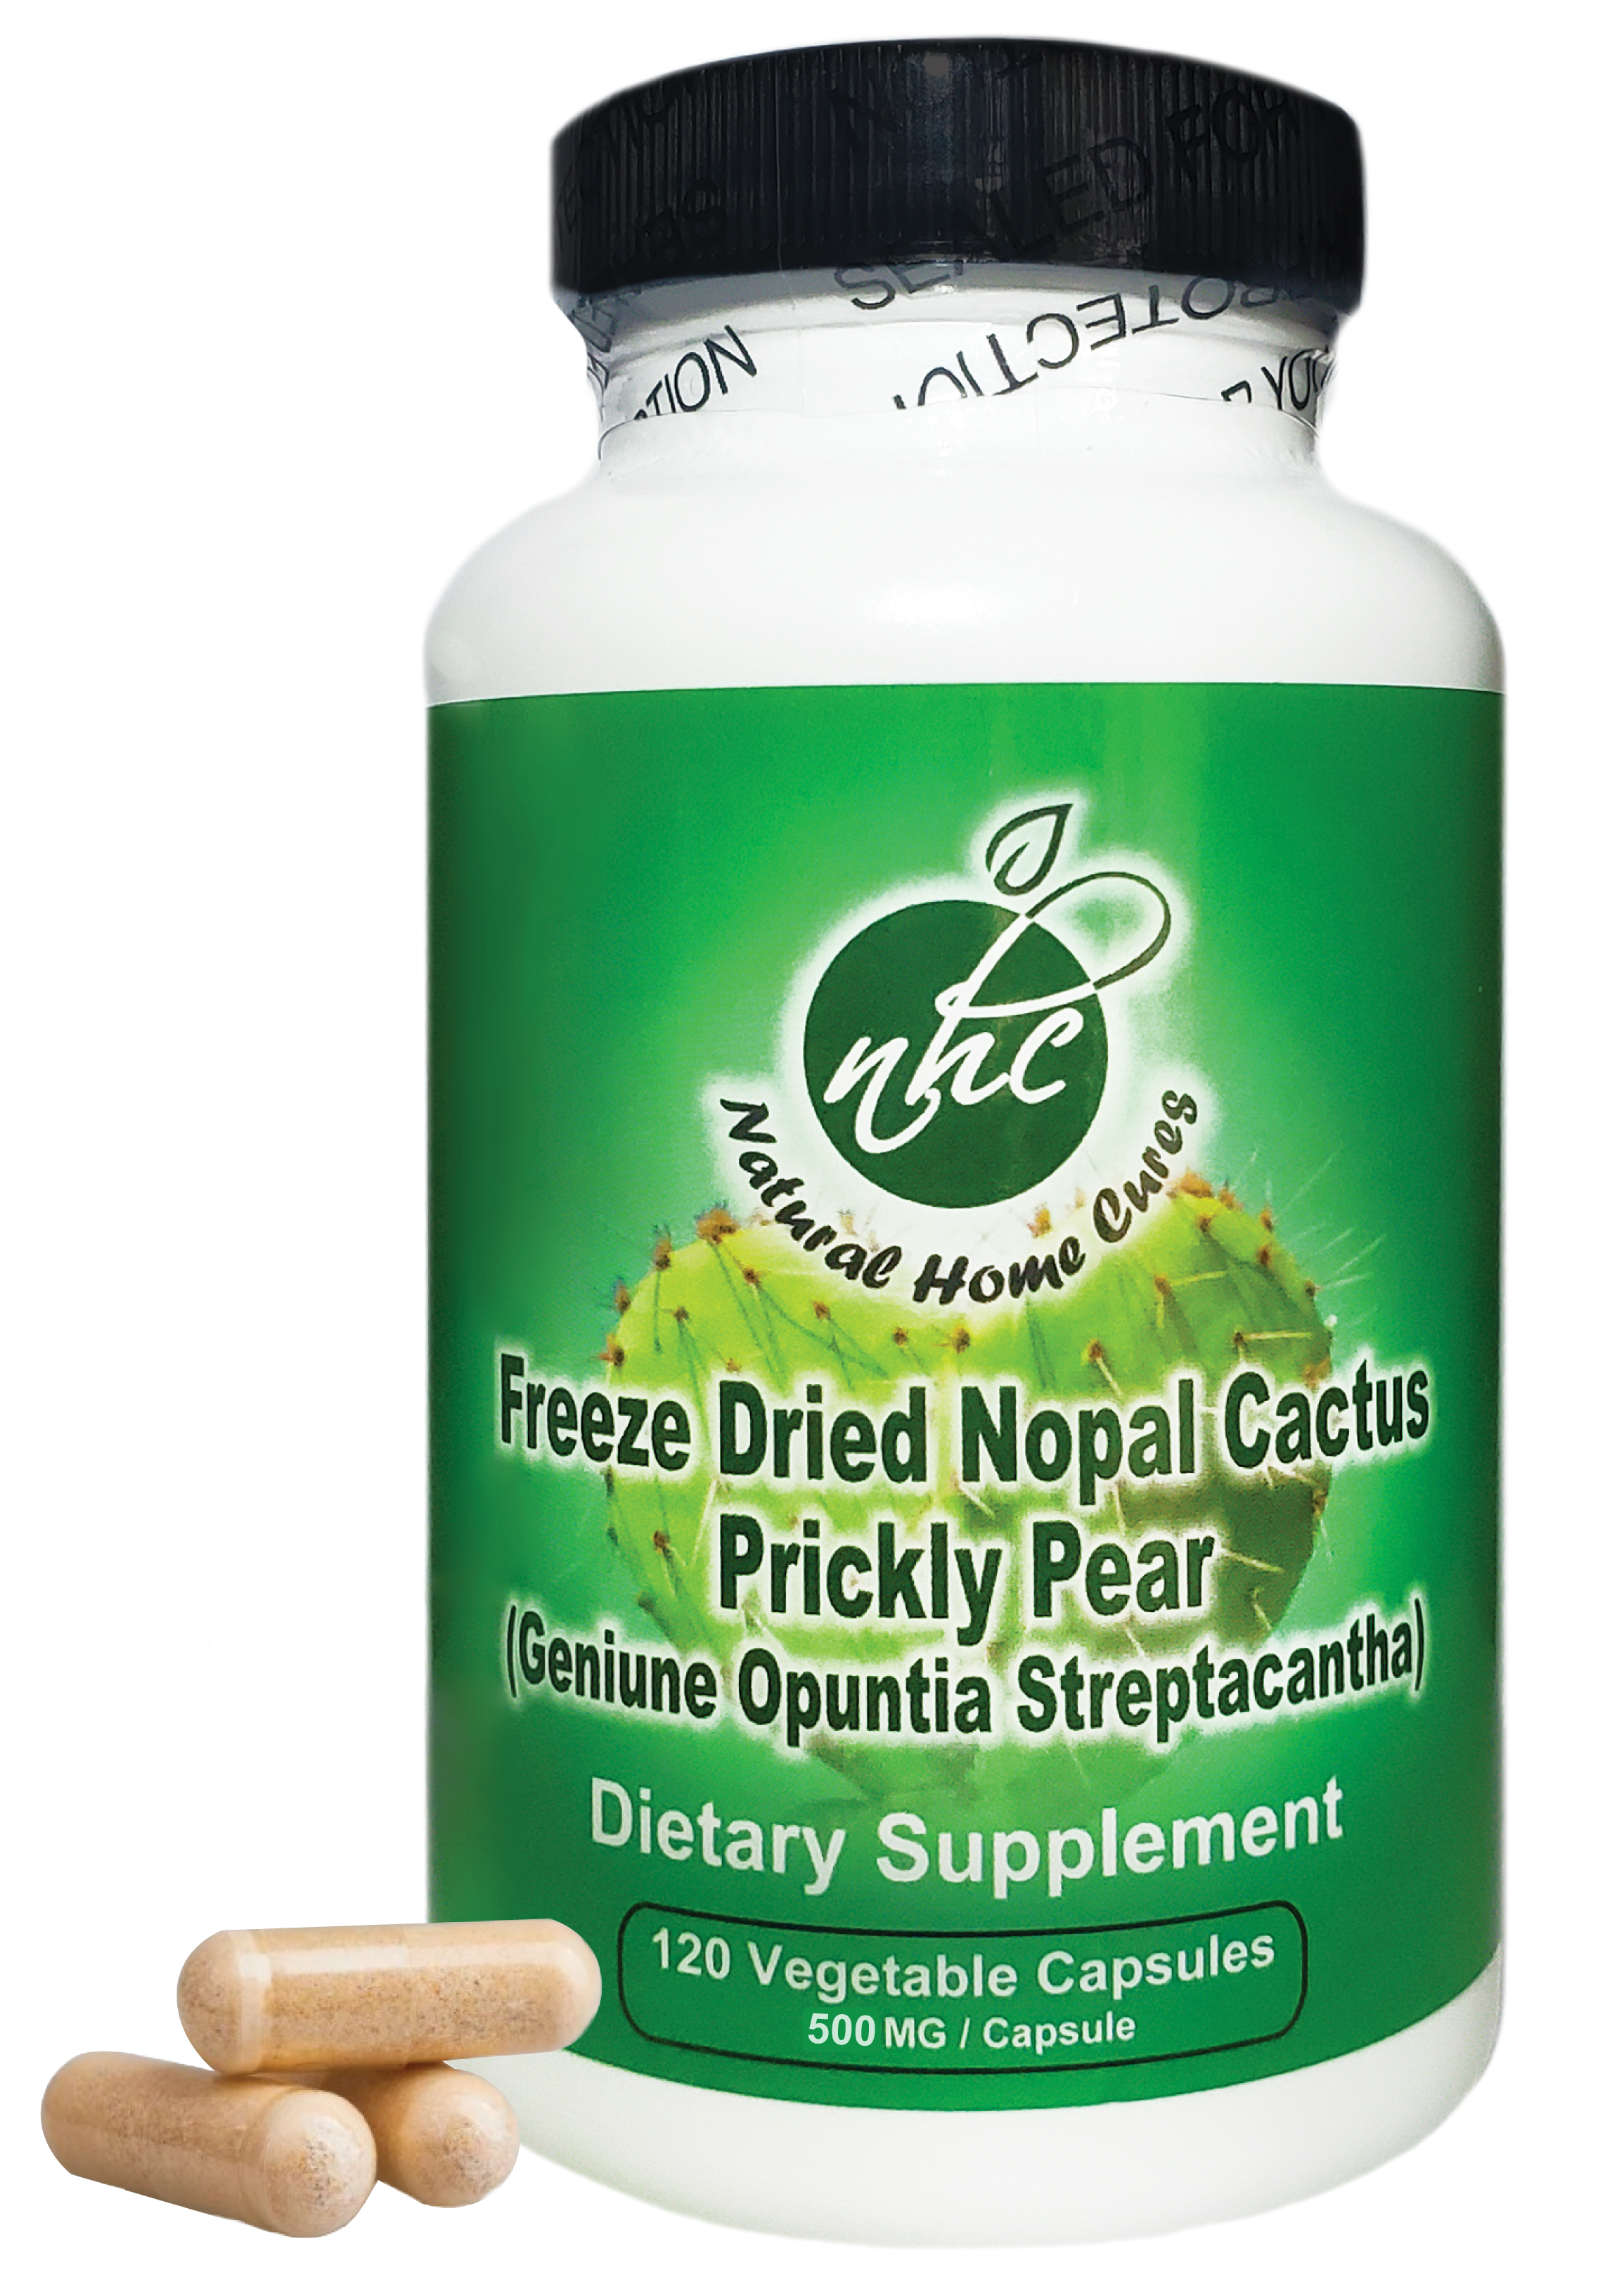 Natural Home Cures Freeze Dried Nopal Cactus Capsules (Prickly Pear Supplements)